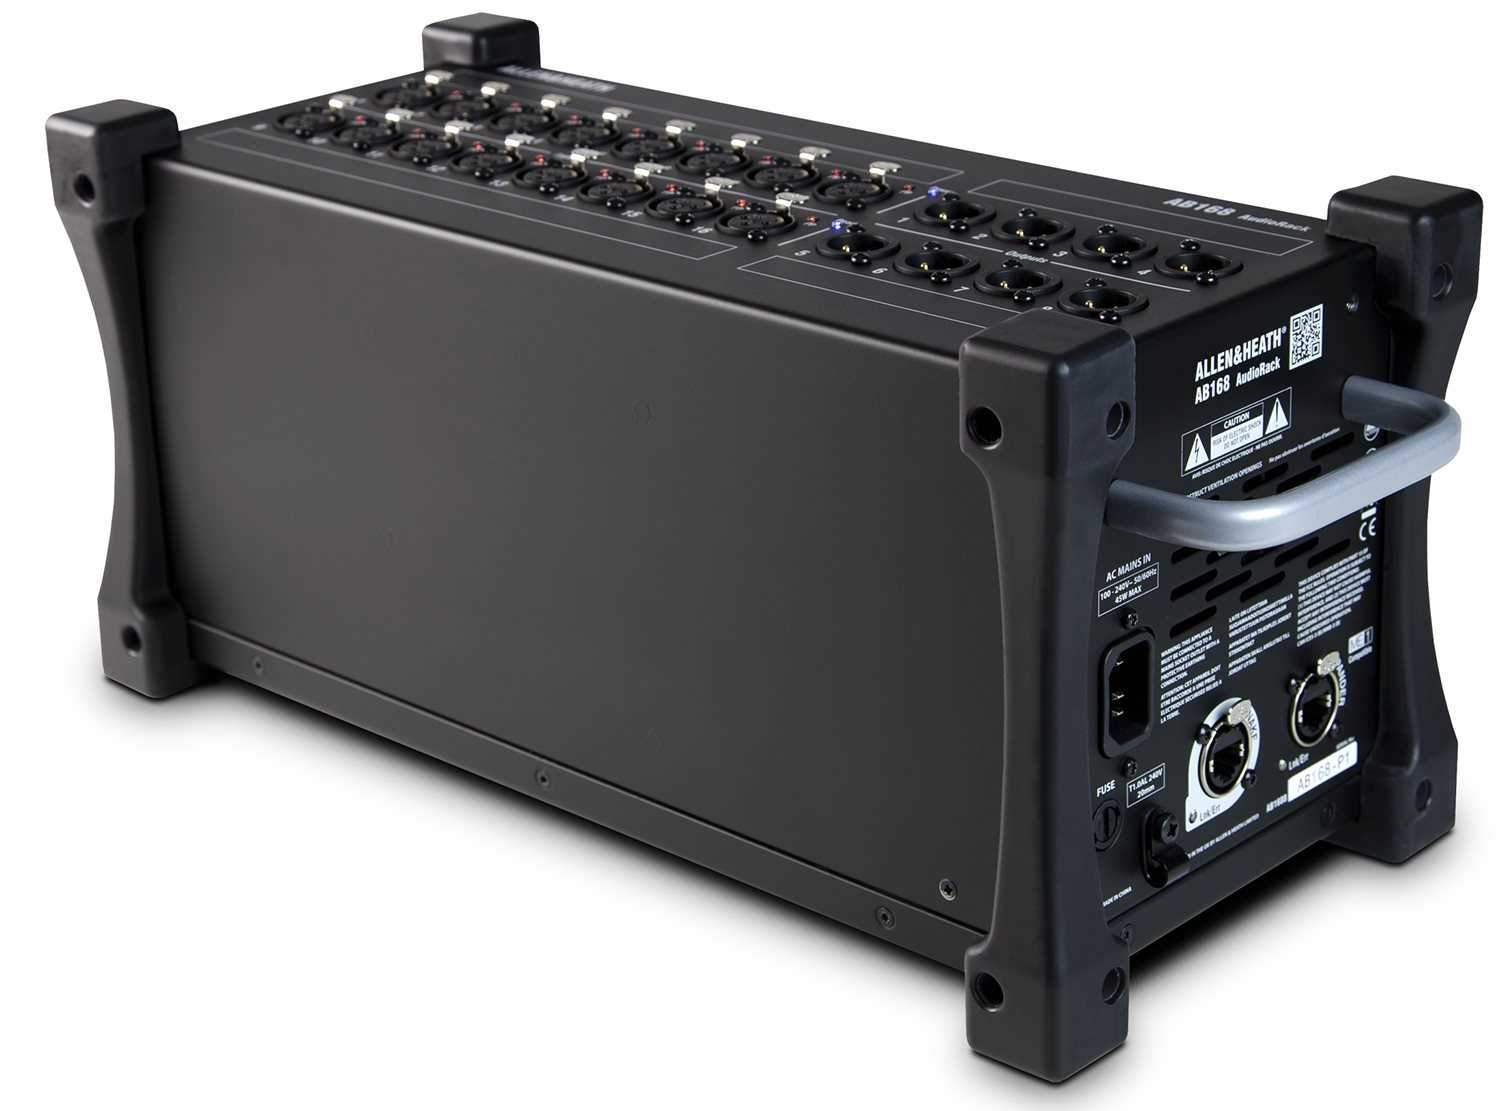 Allen & Heath AB168 Digital Stage Box for GLD & Qu Mixing Systems - ProSound and Stage Lighting